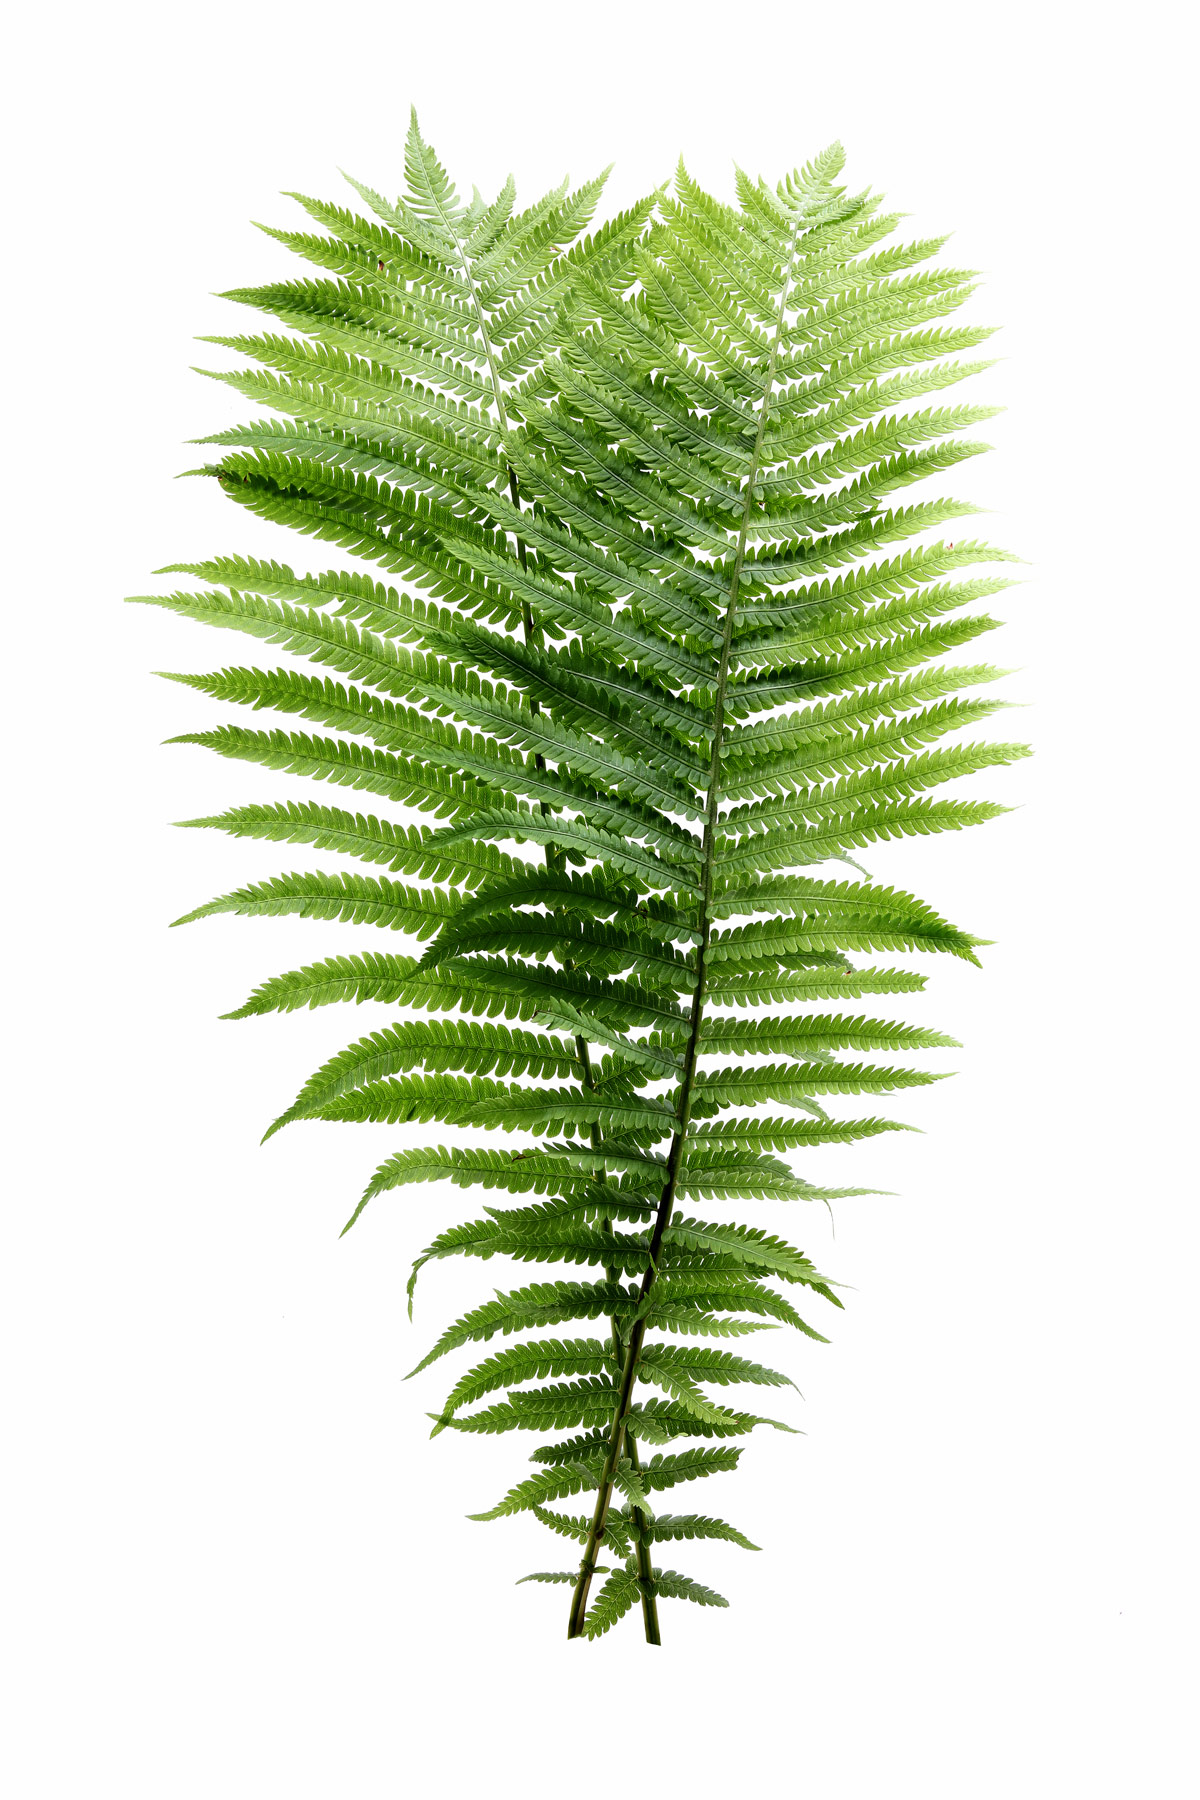 The King of Ferns